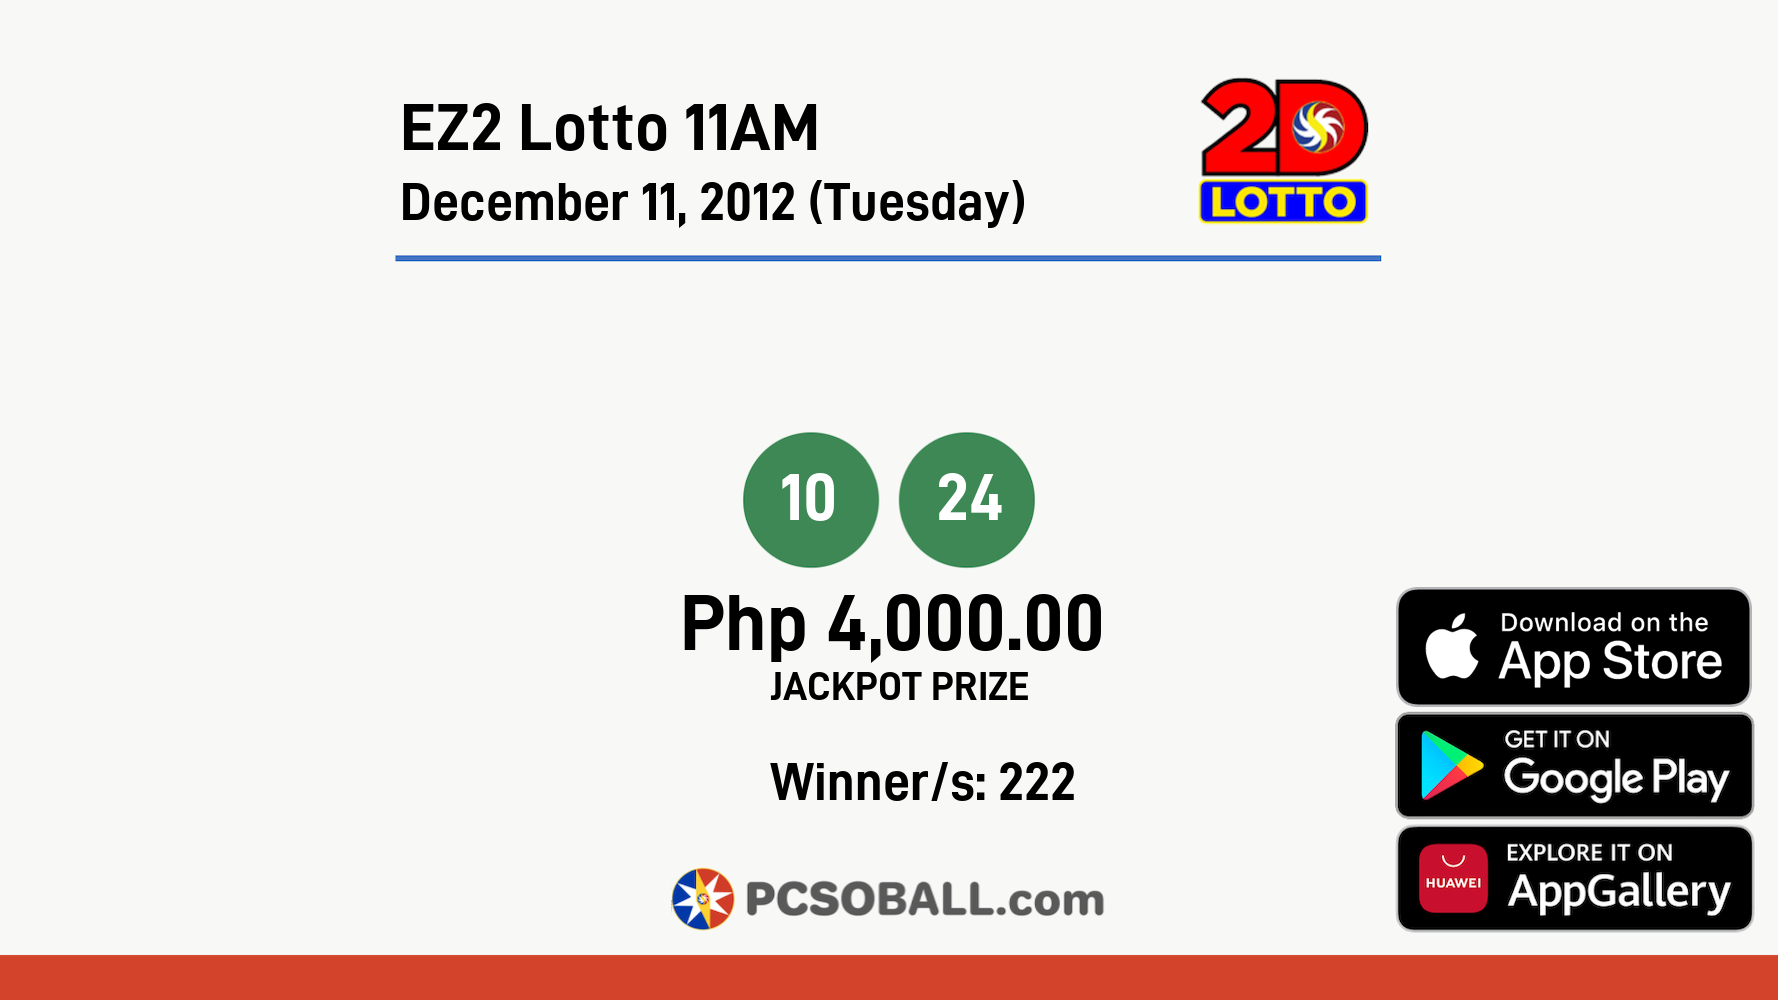 EZ2 Lotto 11AM December 11, 2012 (Tuesday) Result